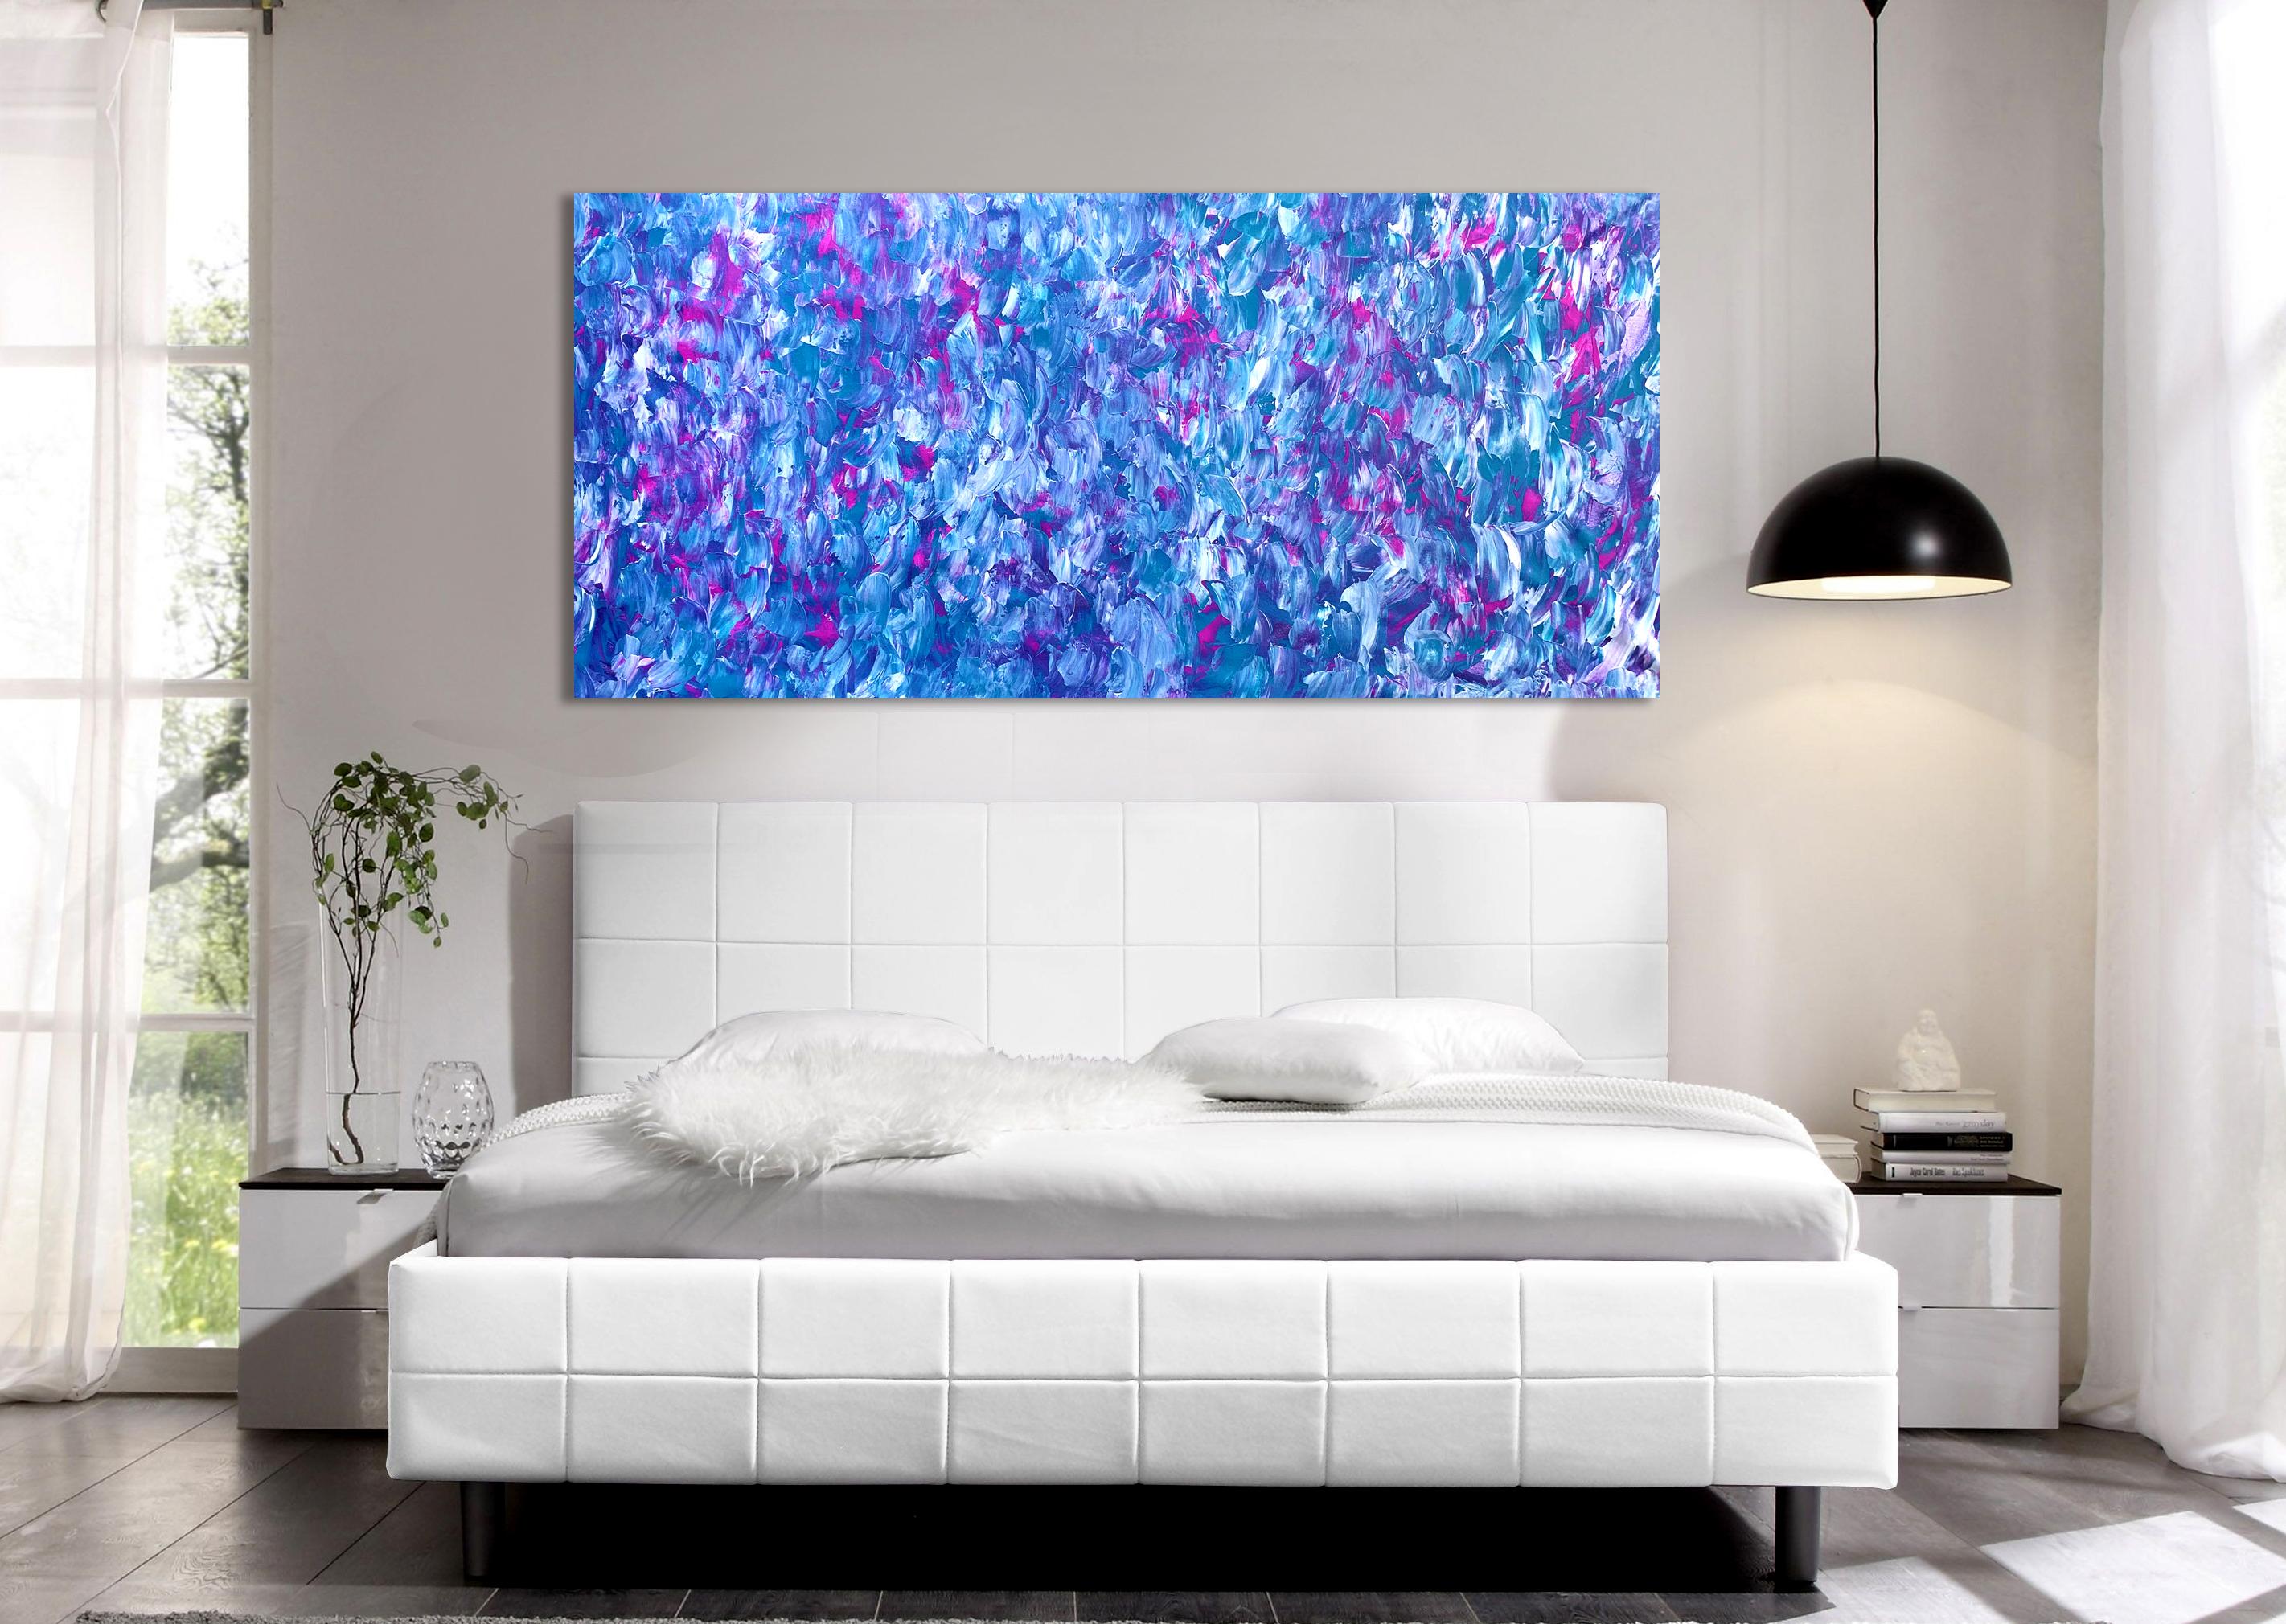 Pink and Blue Romance - Painting by Estelle Asmodelle